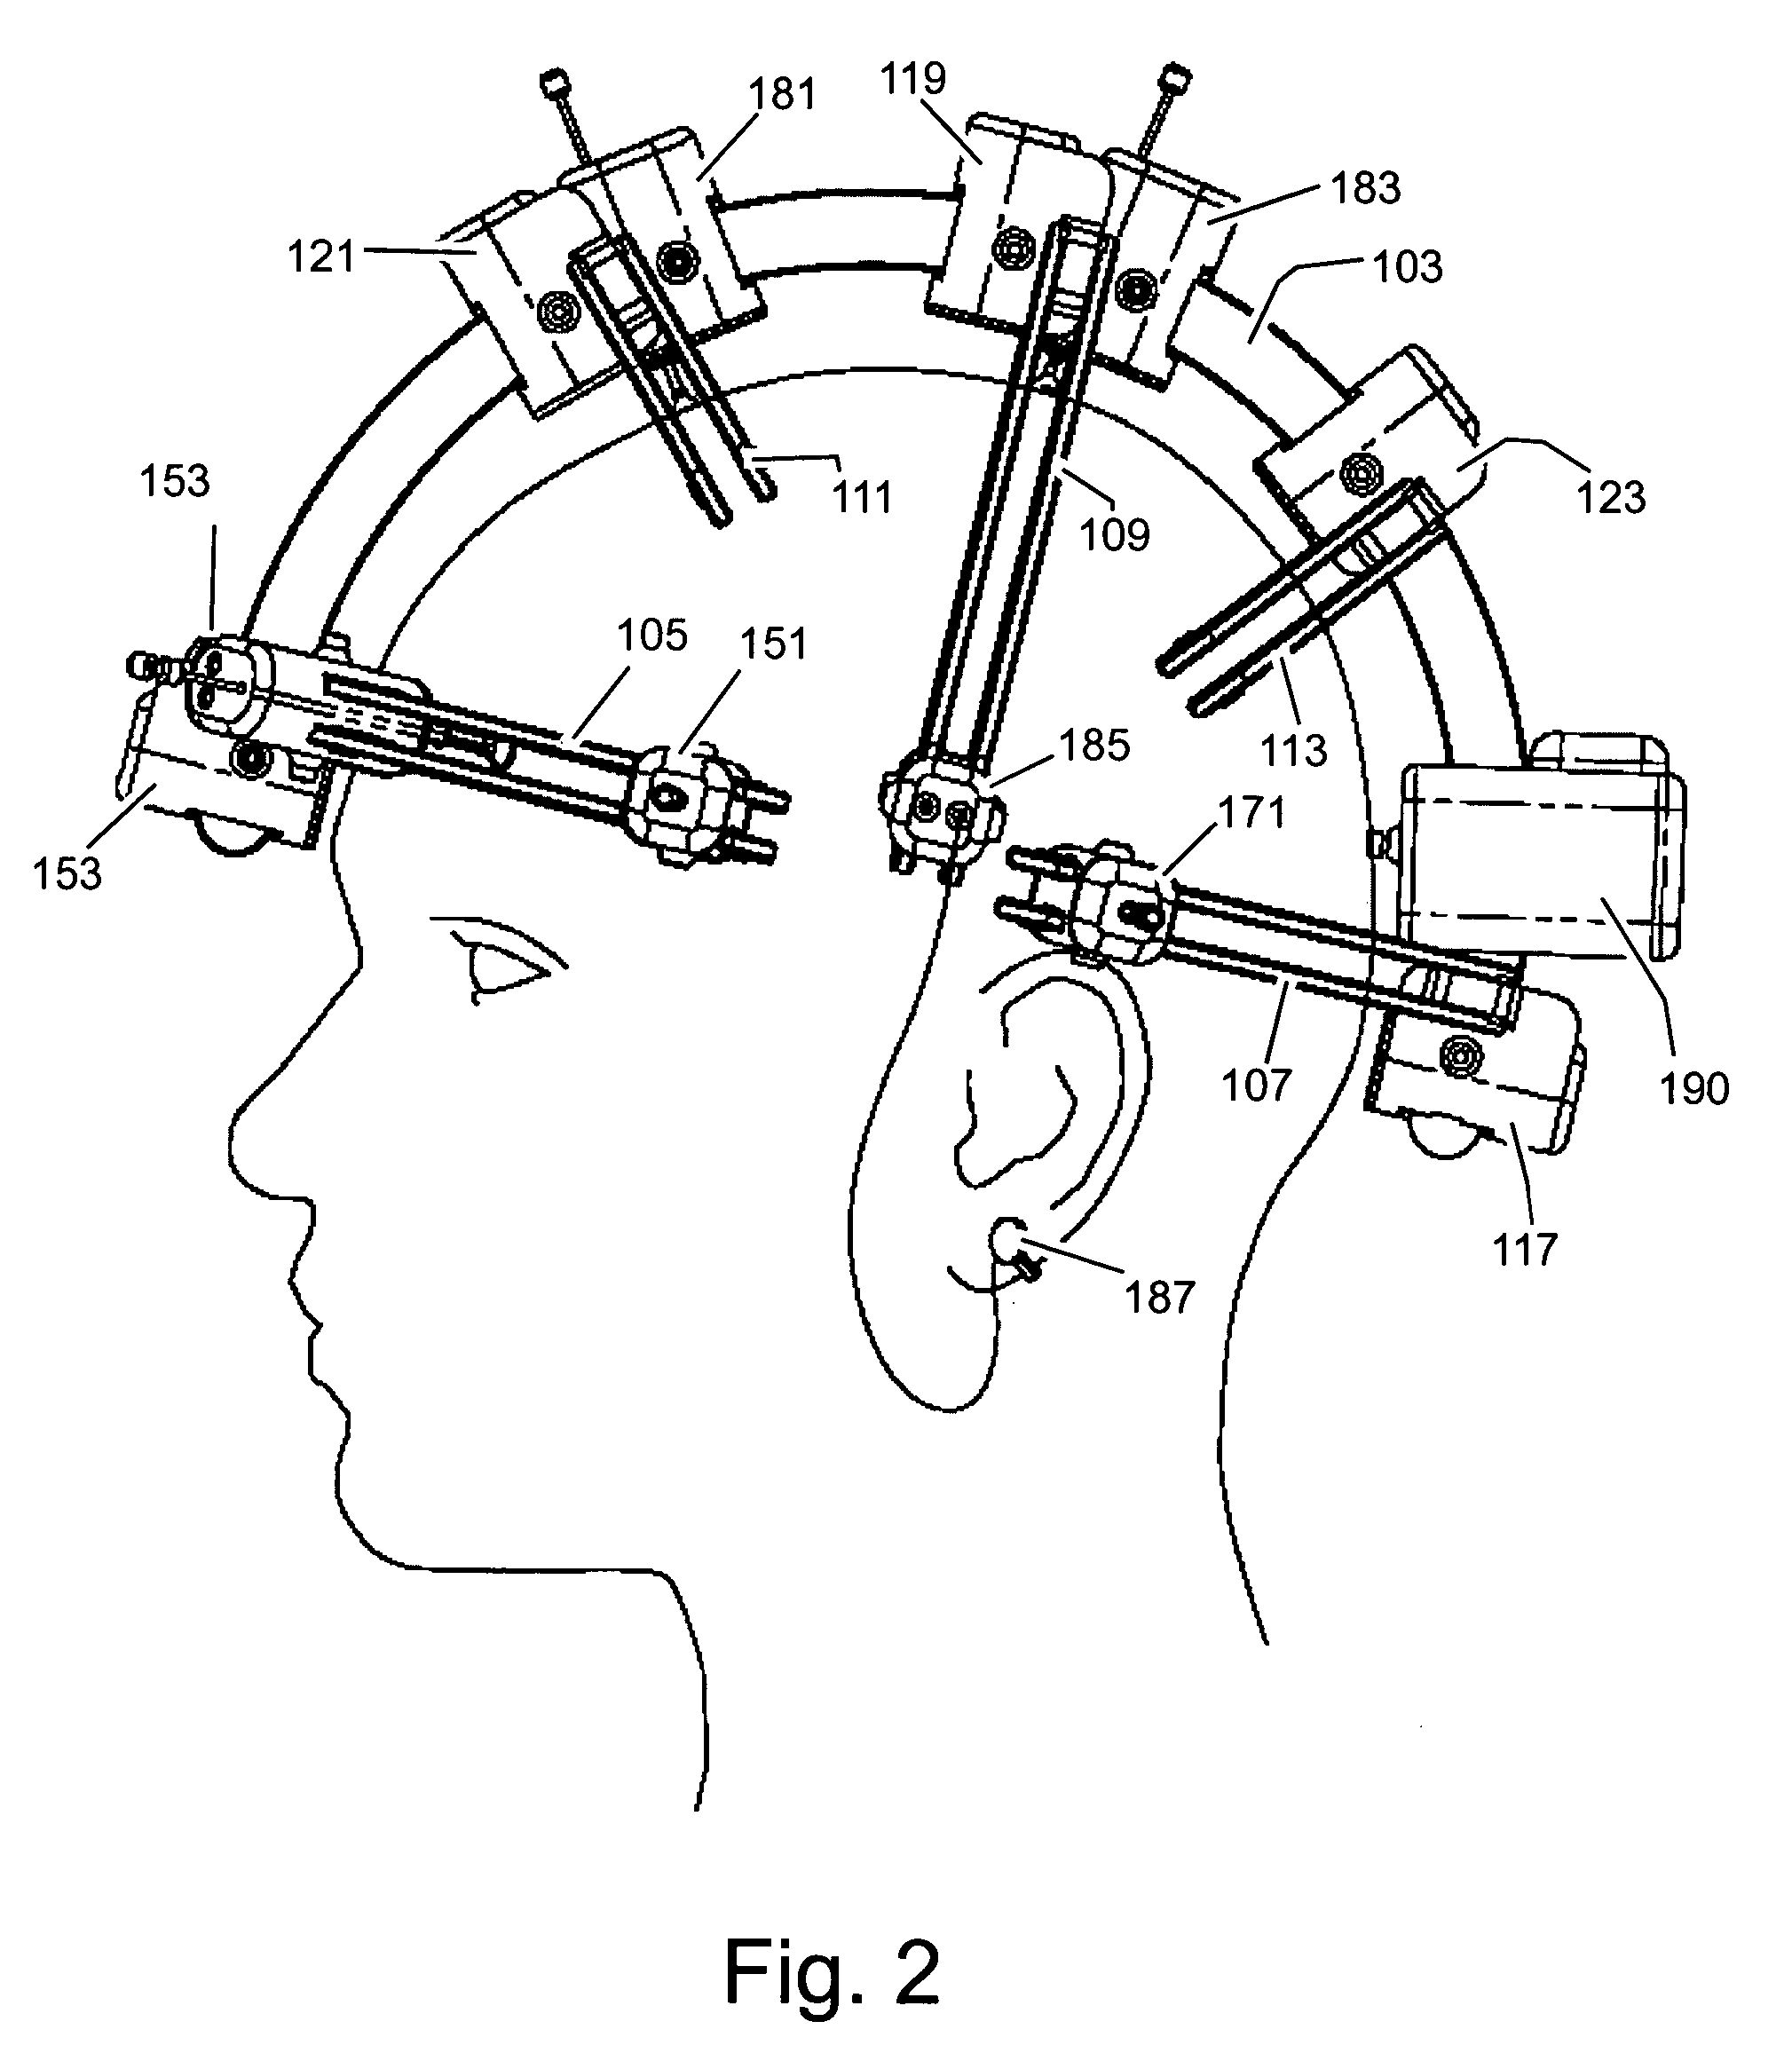 Methods and apparatus for positioning and retrieving information from a plurality of brain activity sensors